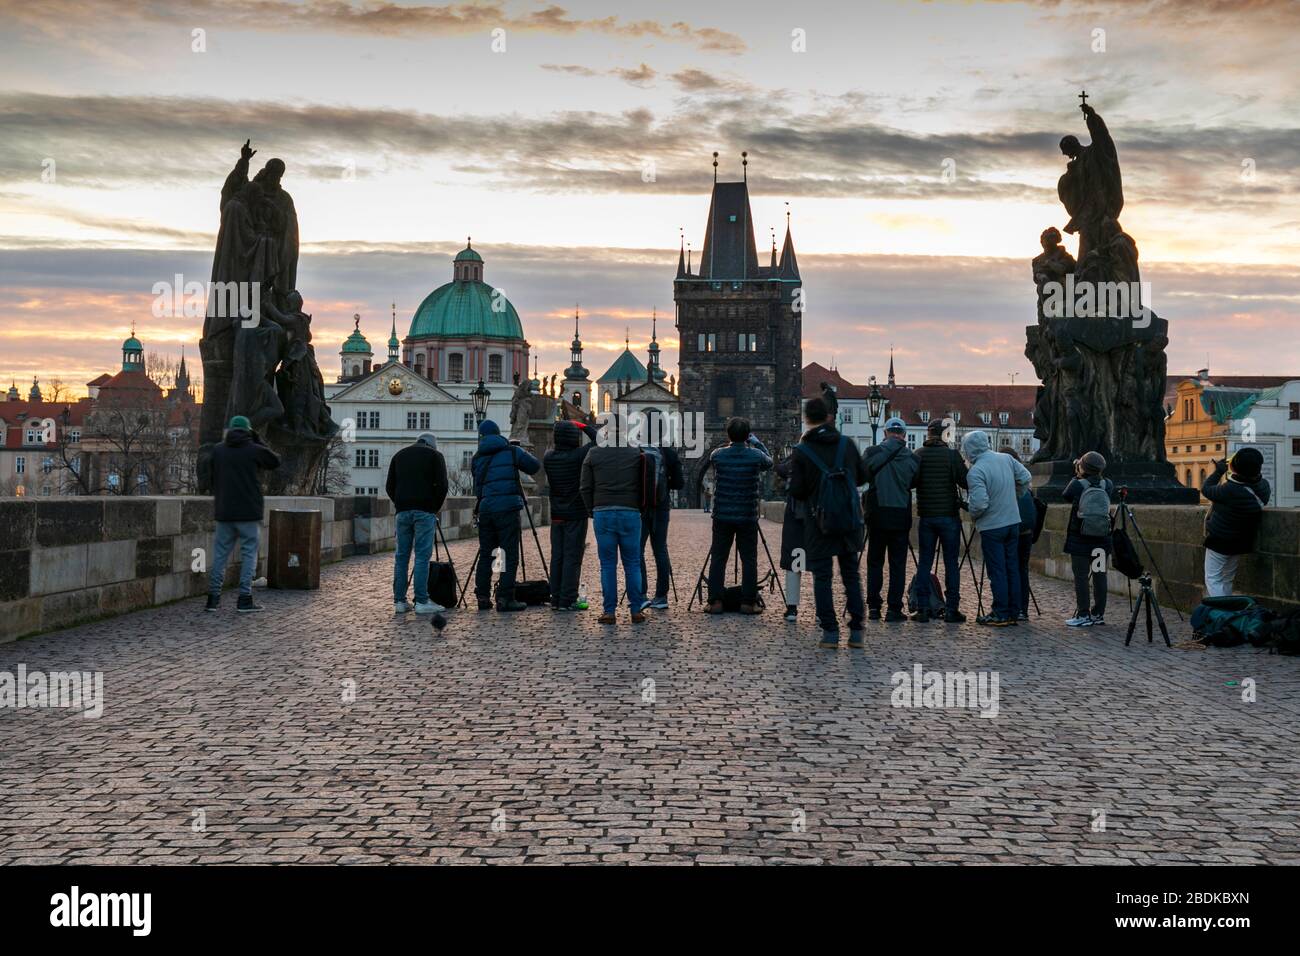 A group of photographers ready to capture sunrise on Charles Bridge with the towers and spires of the Old Town beyond, Prague, Czech Republic Stock Photo